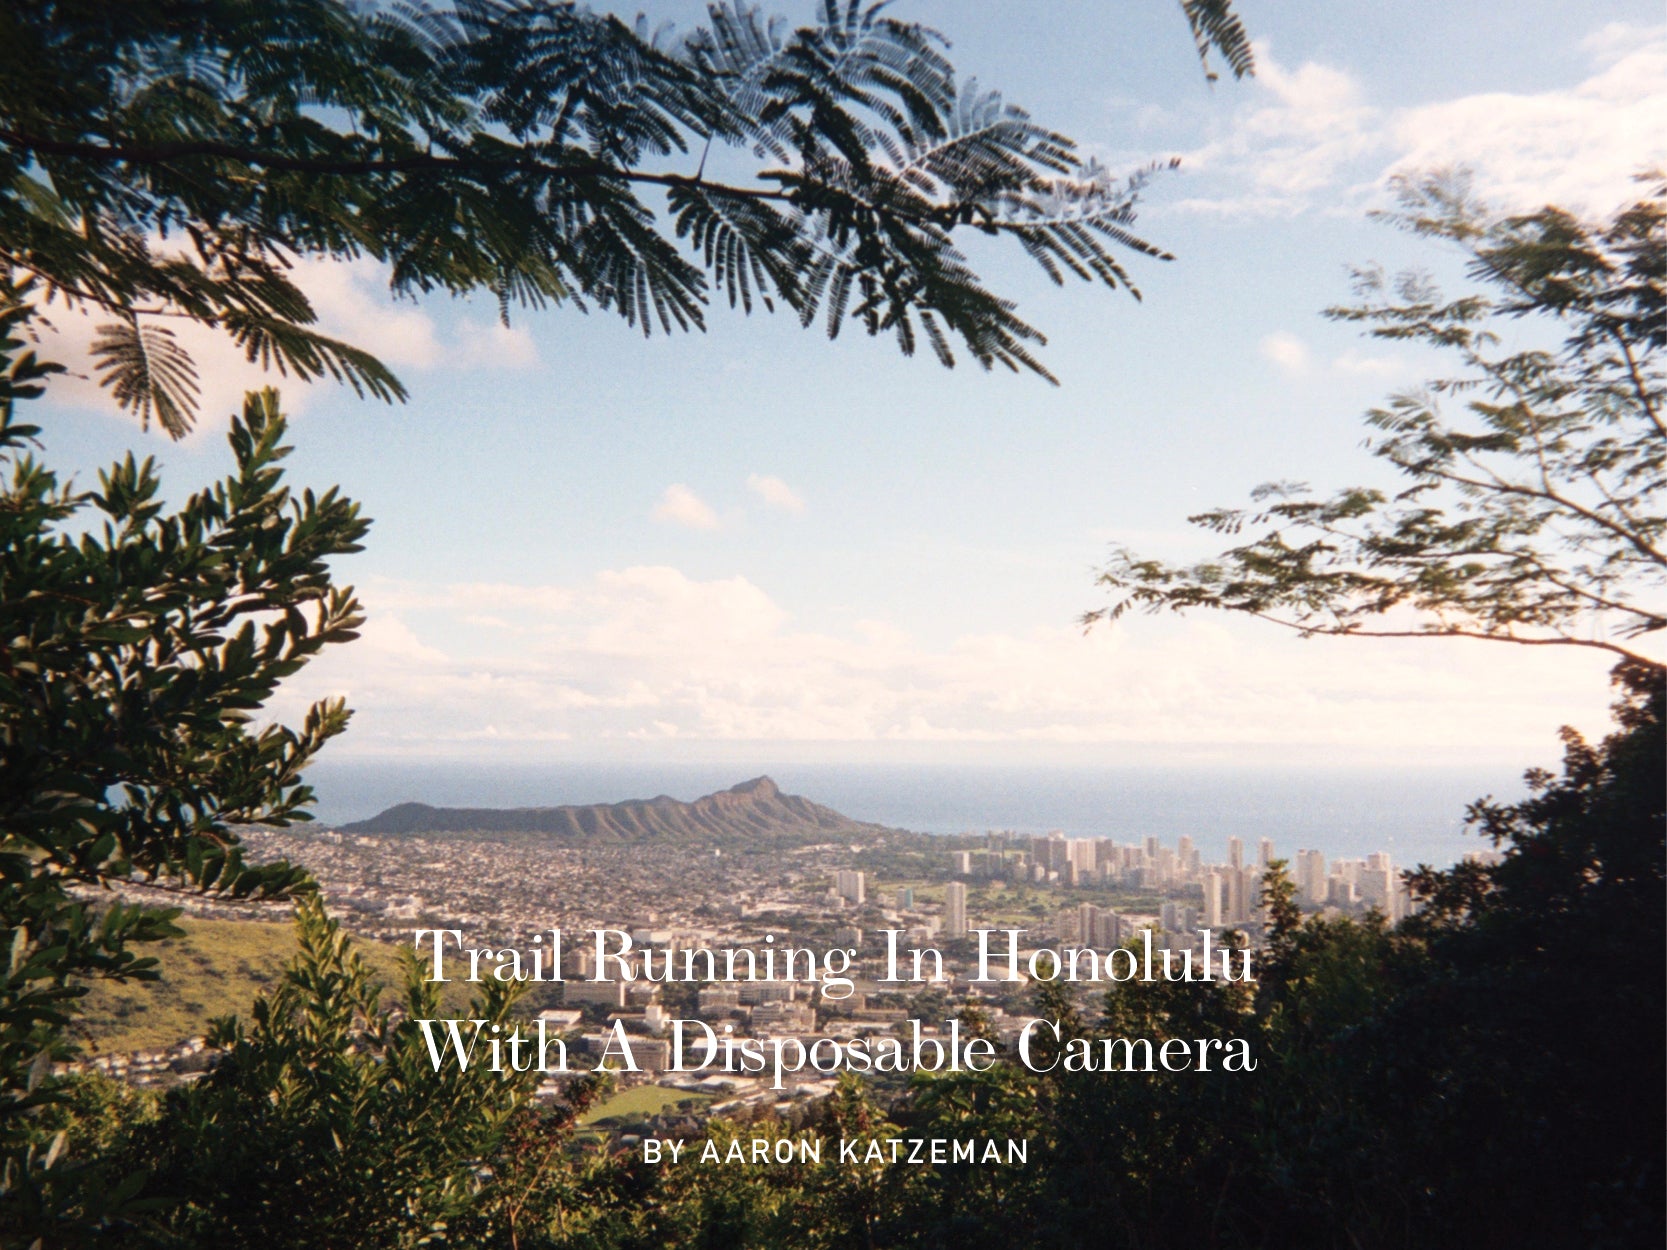 TRAIL RUNNING IN HONOLULU WITH A DISPOSABLE CAMERA